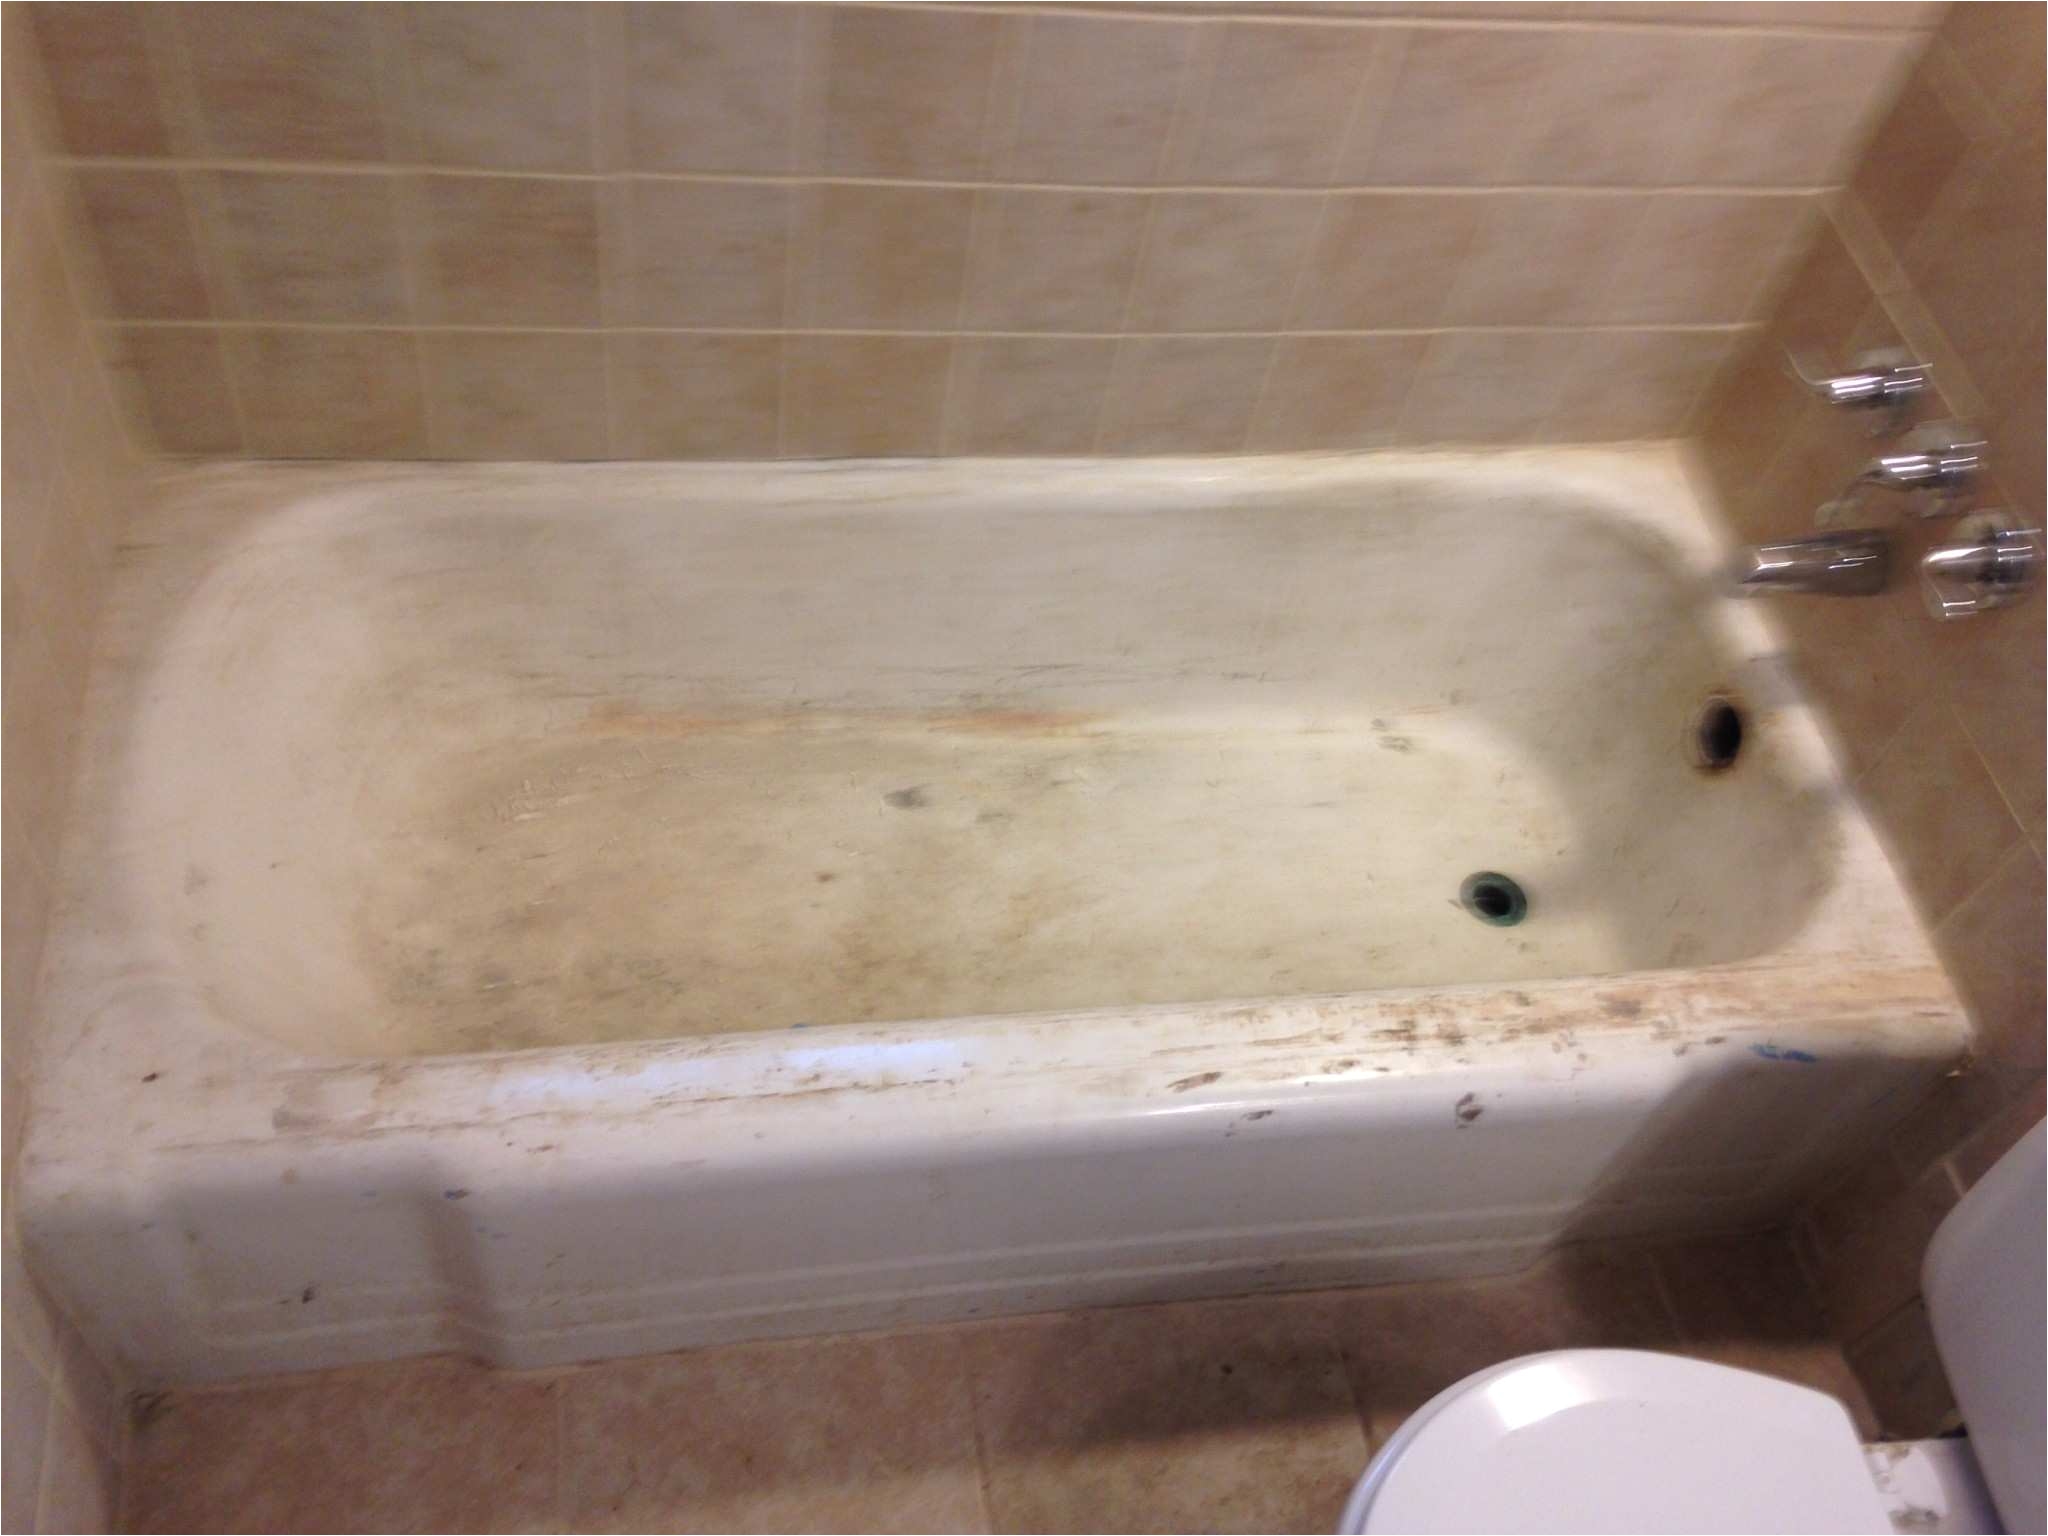 replace bath with shower cost bathtub reglazing is a cost effective alternative to